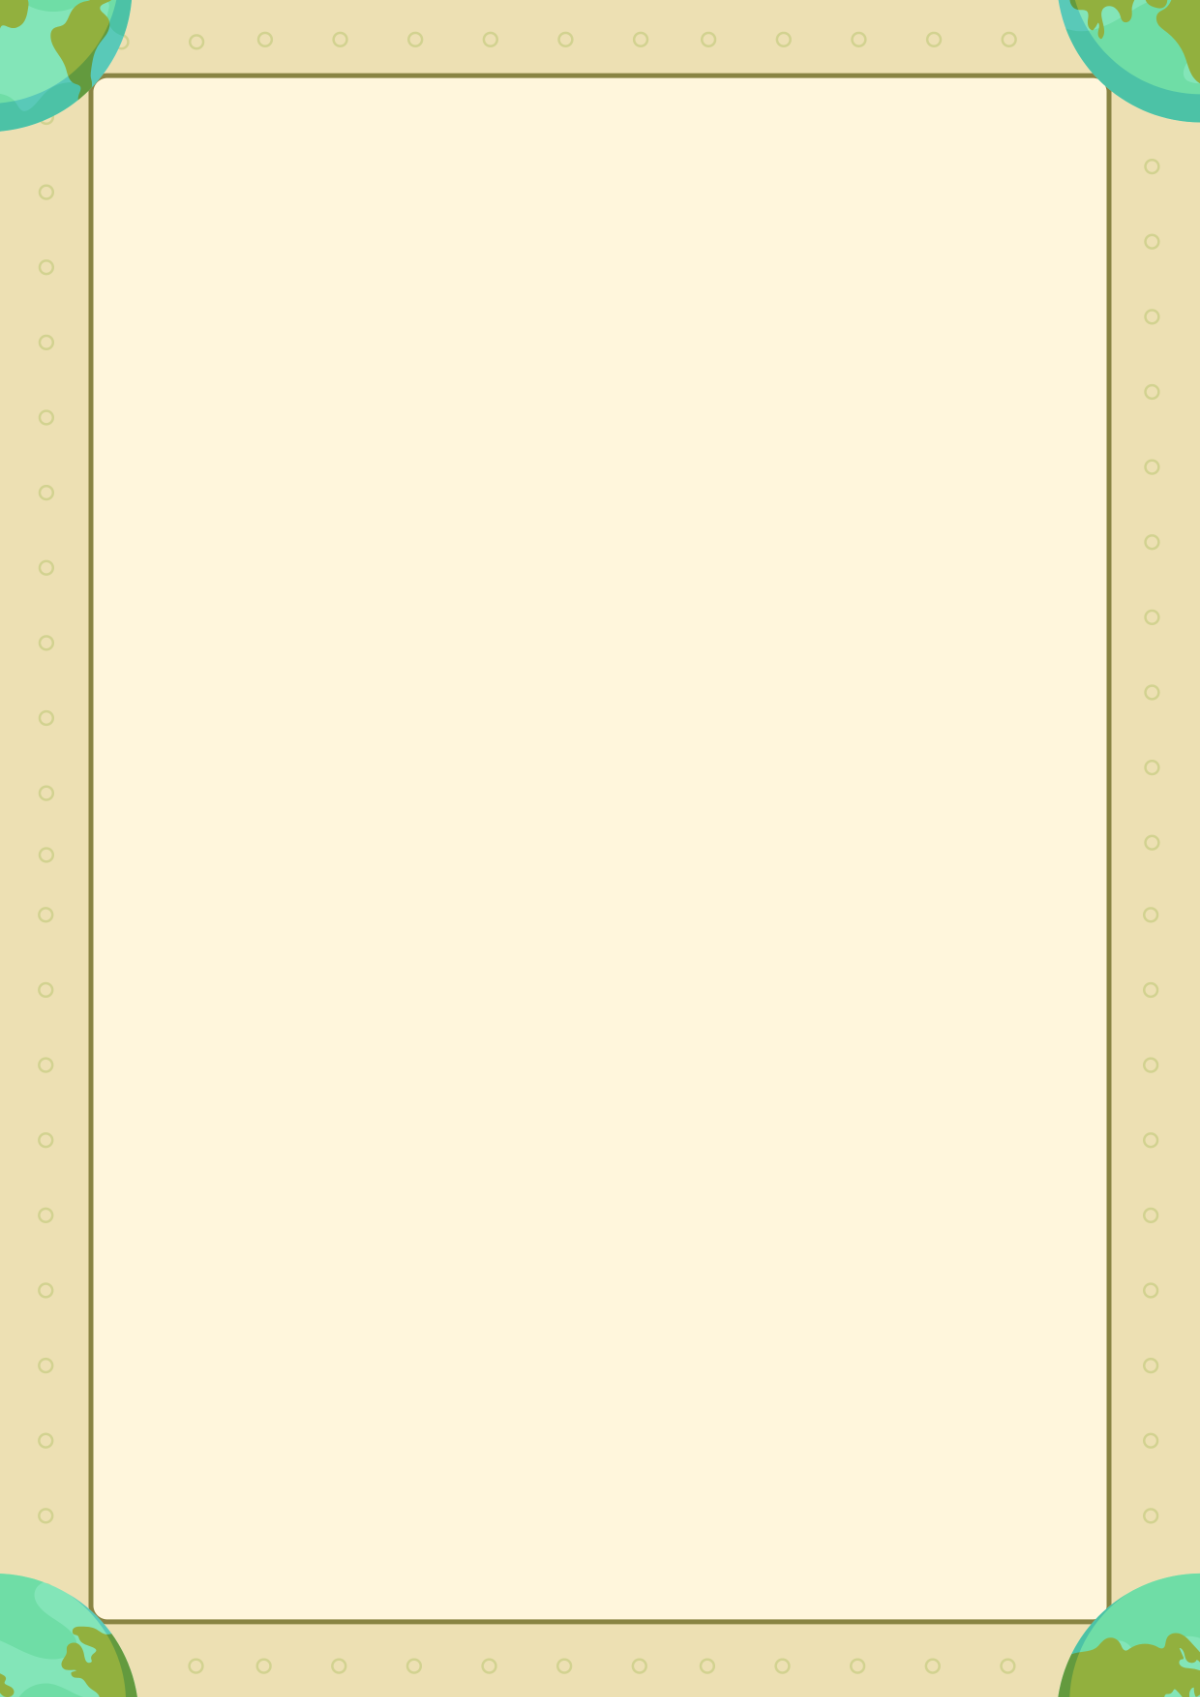 Free Earth Day Frame Template